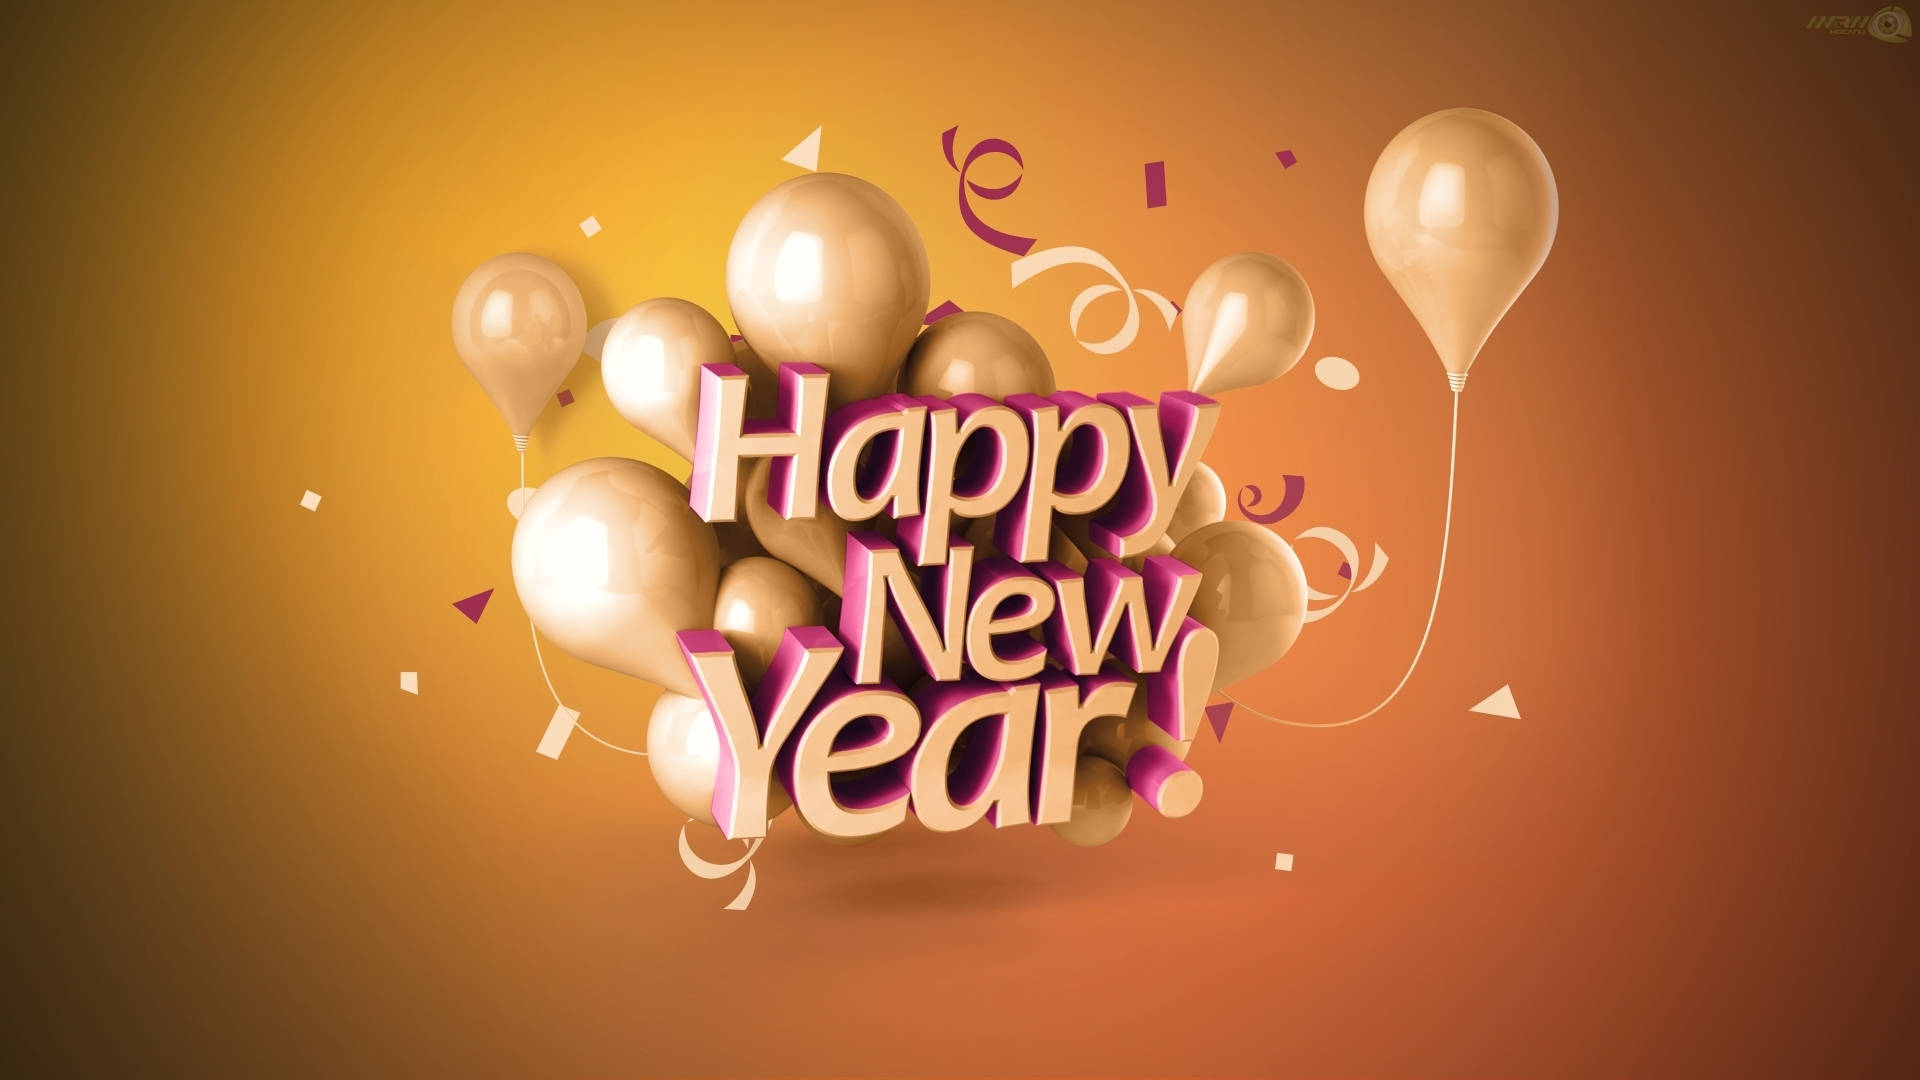 15 Best New Year 2023 wallpapers for iPhone (Free HD download) - iGeeksBlog